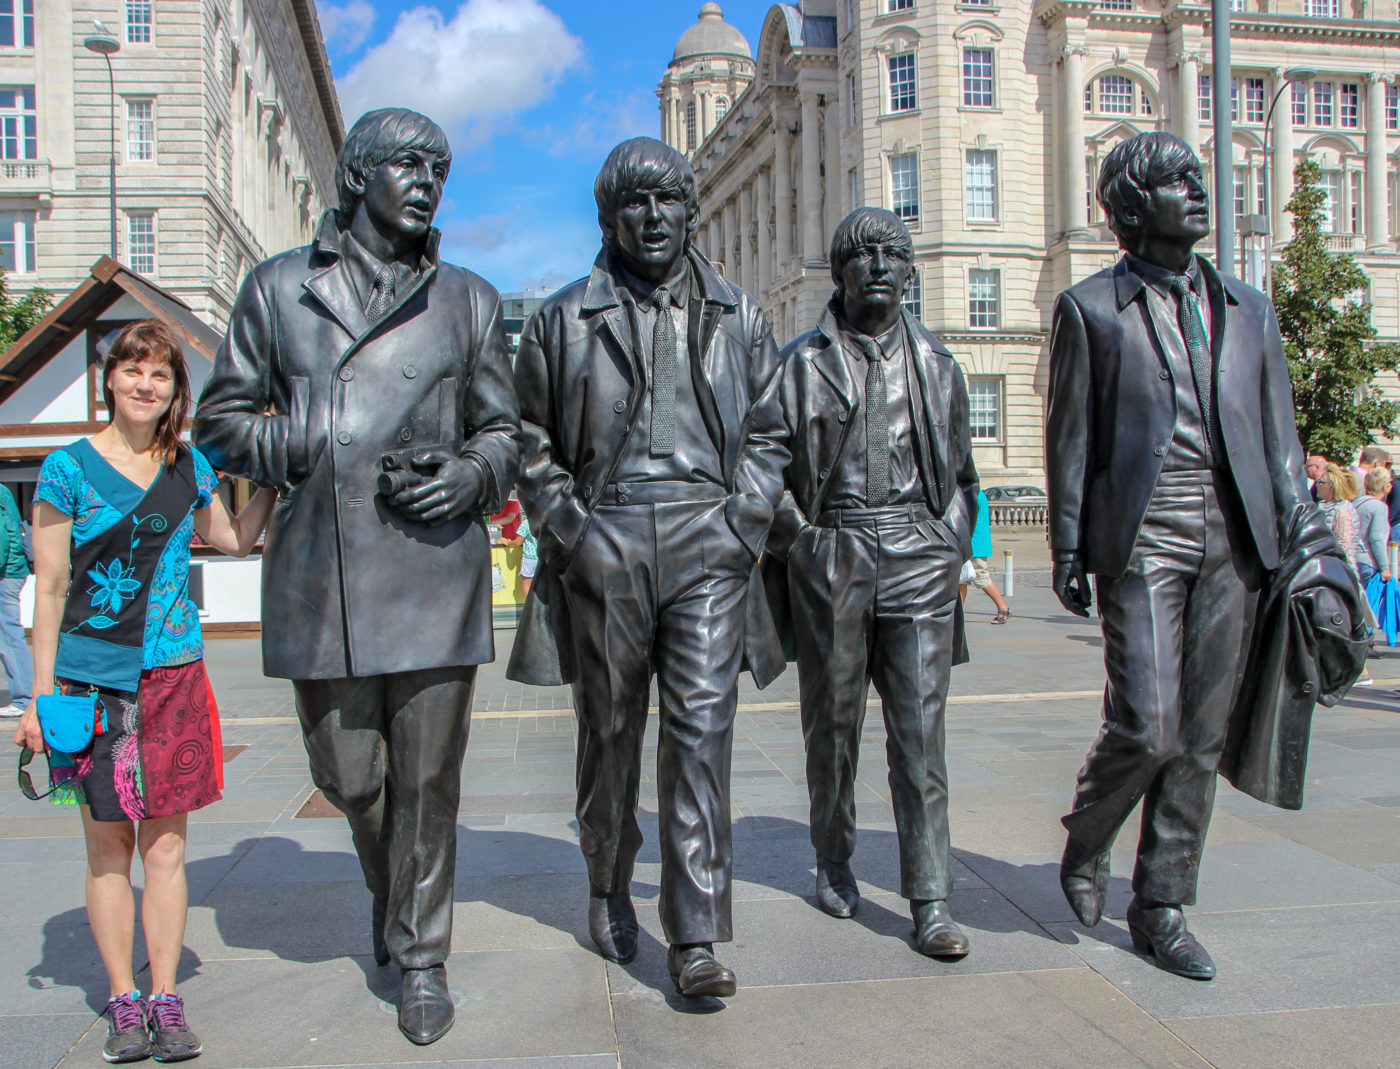 beatles tours in liverpool